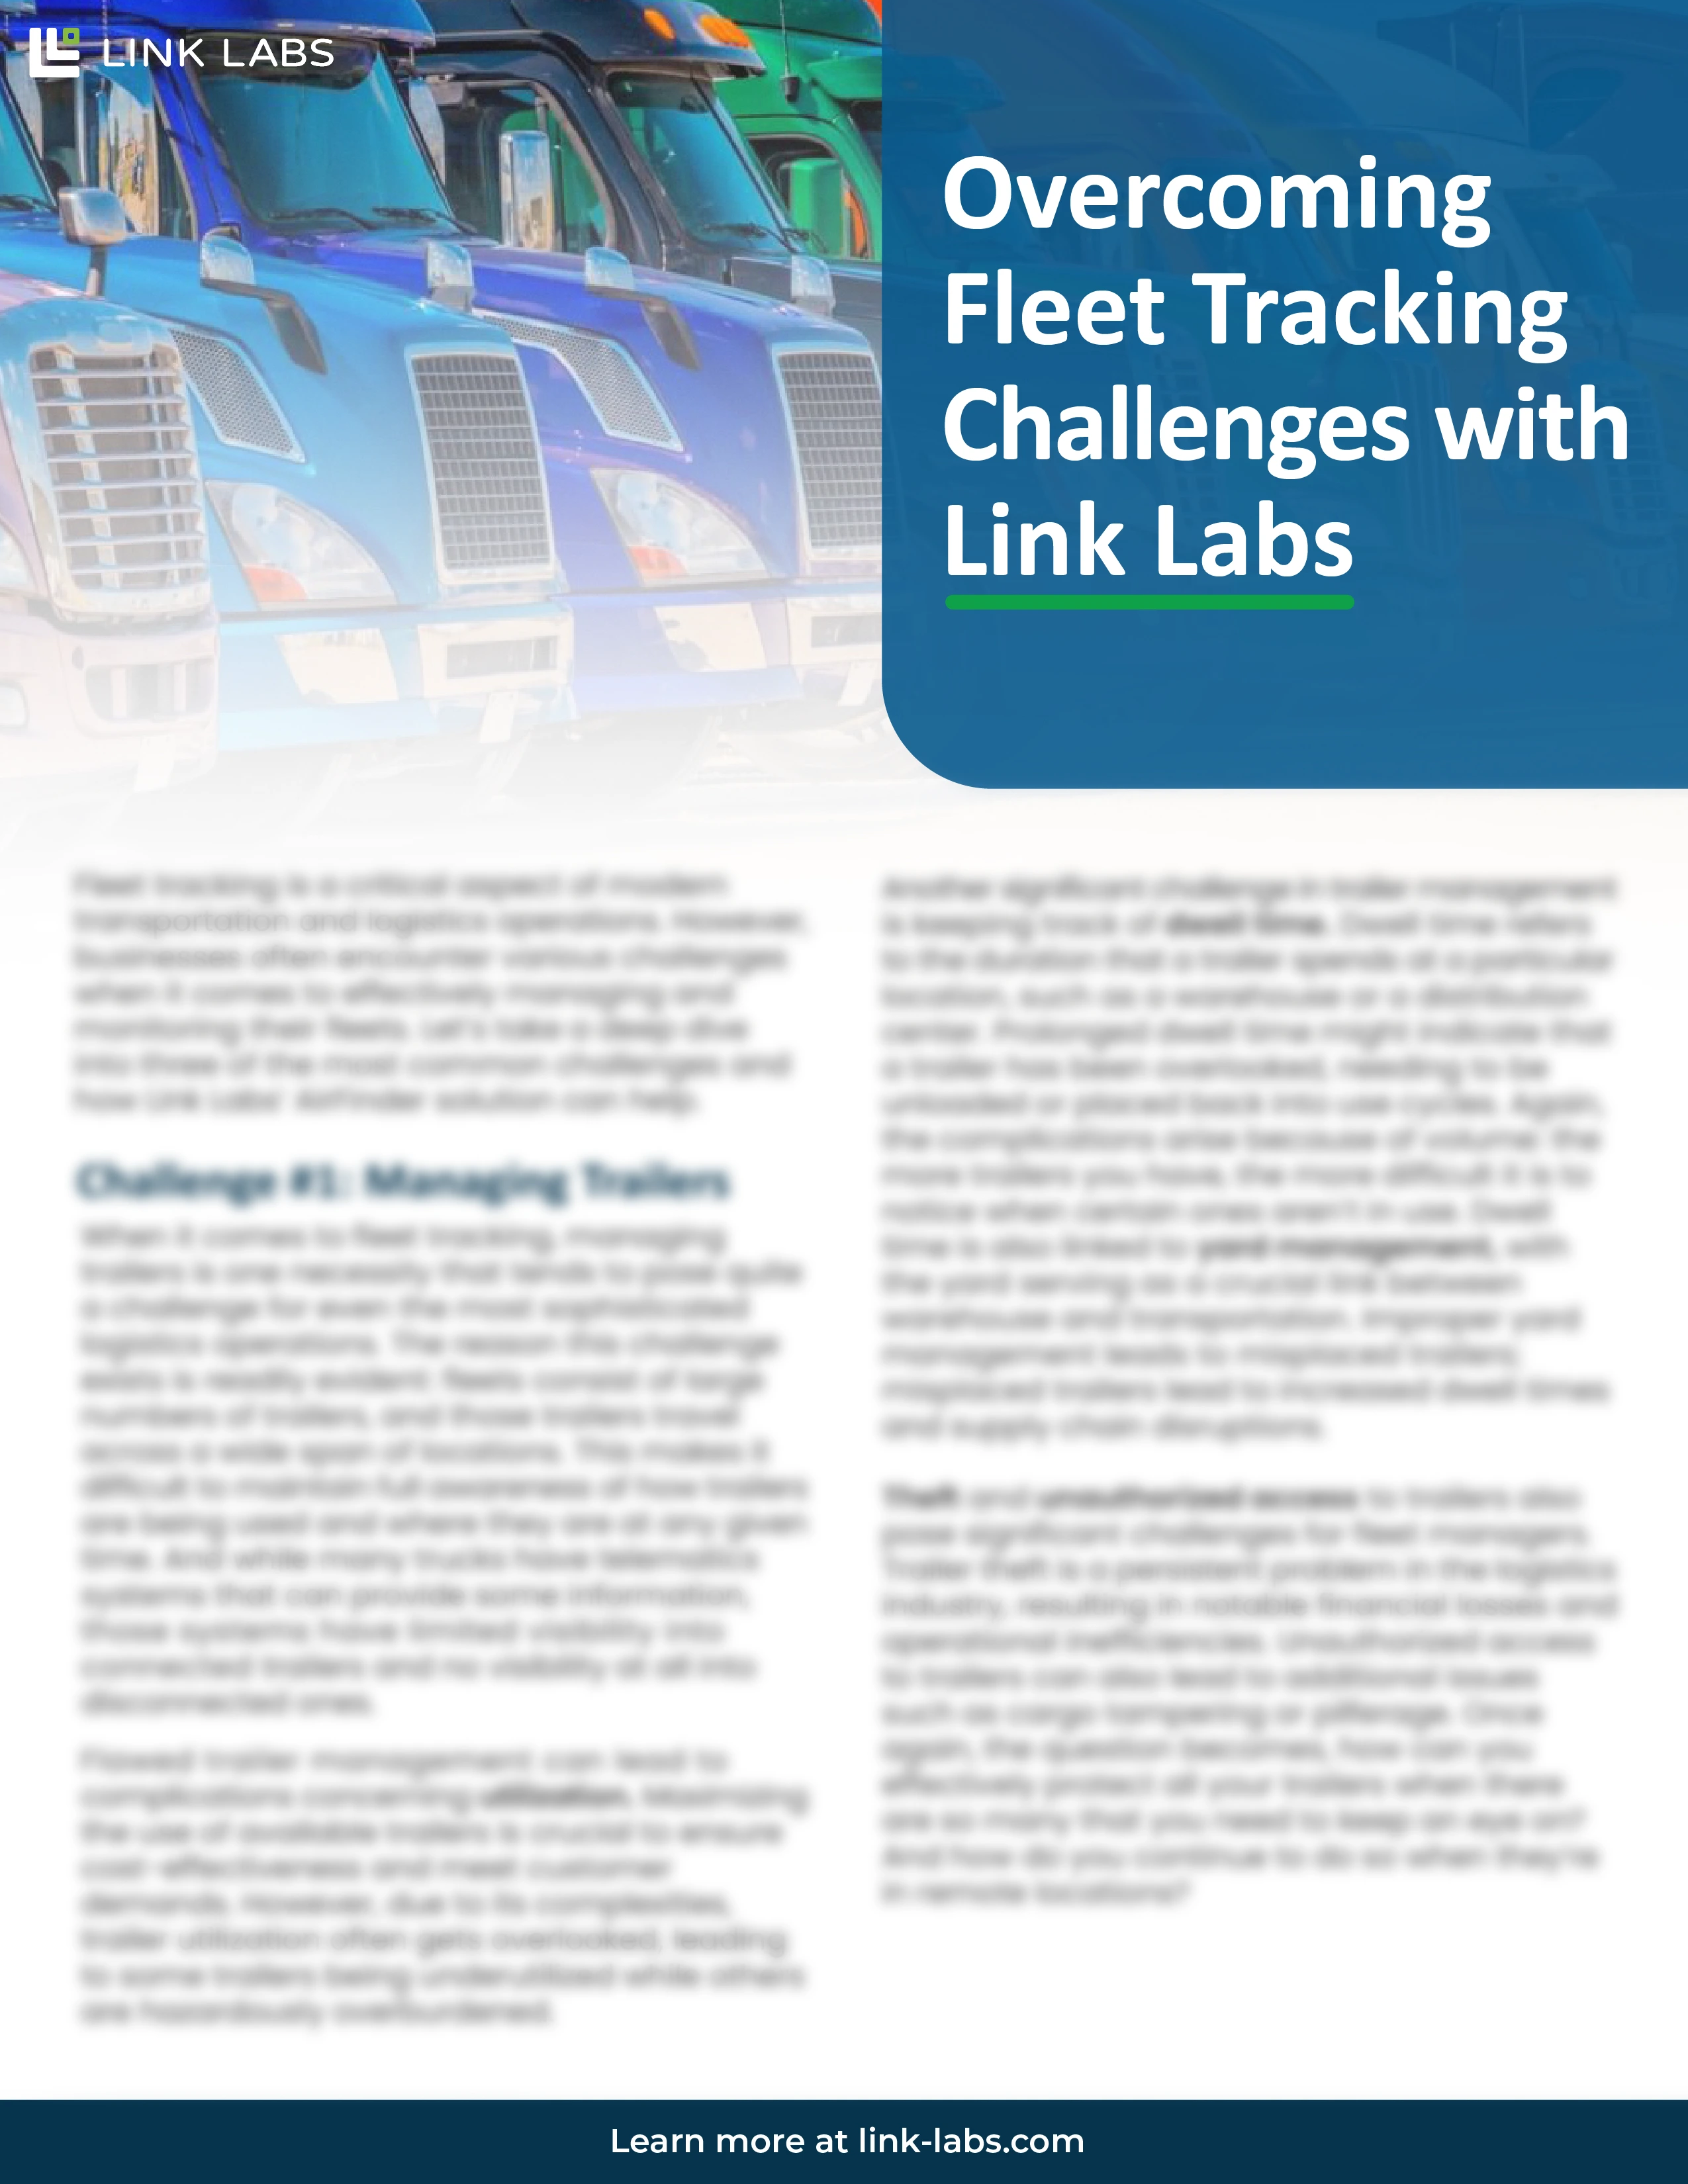 Overcoming Fleet Tracking Challenges with Link Labs